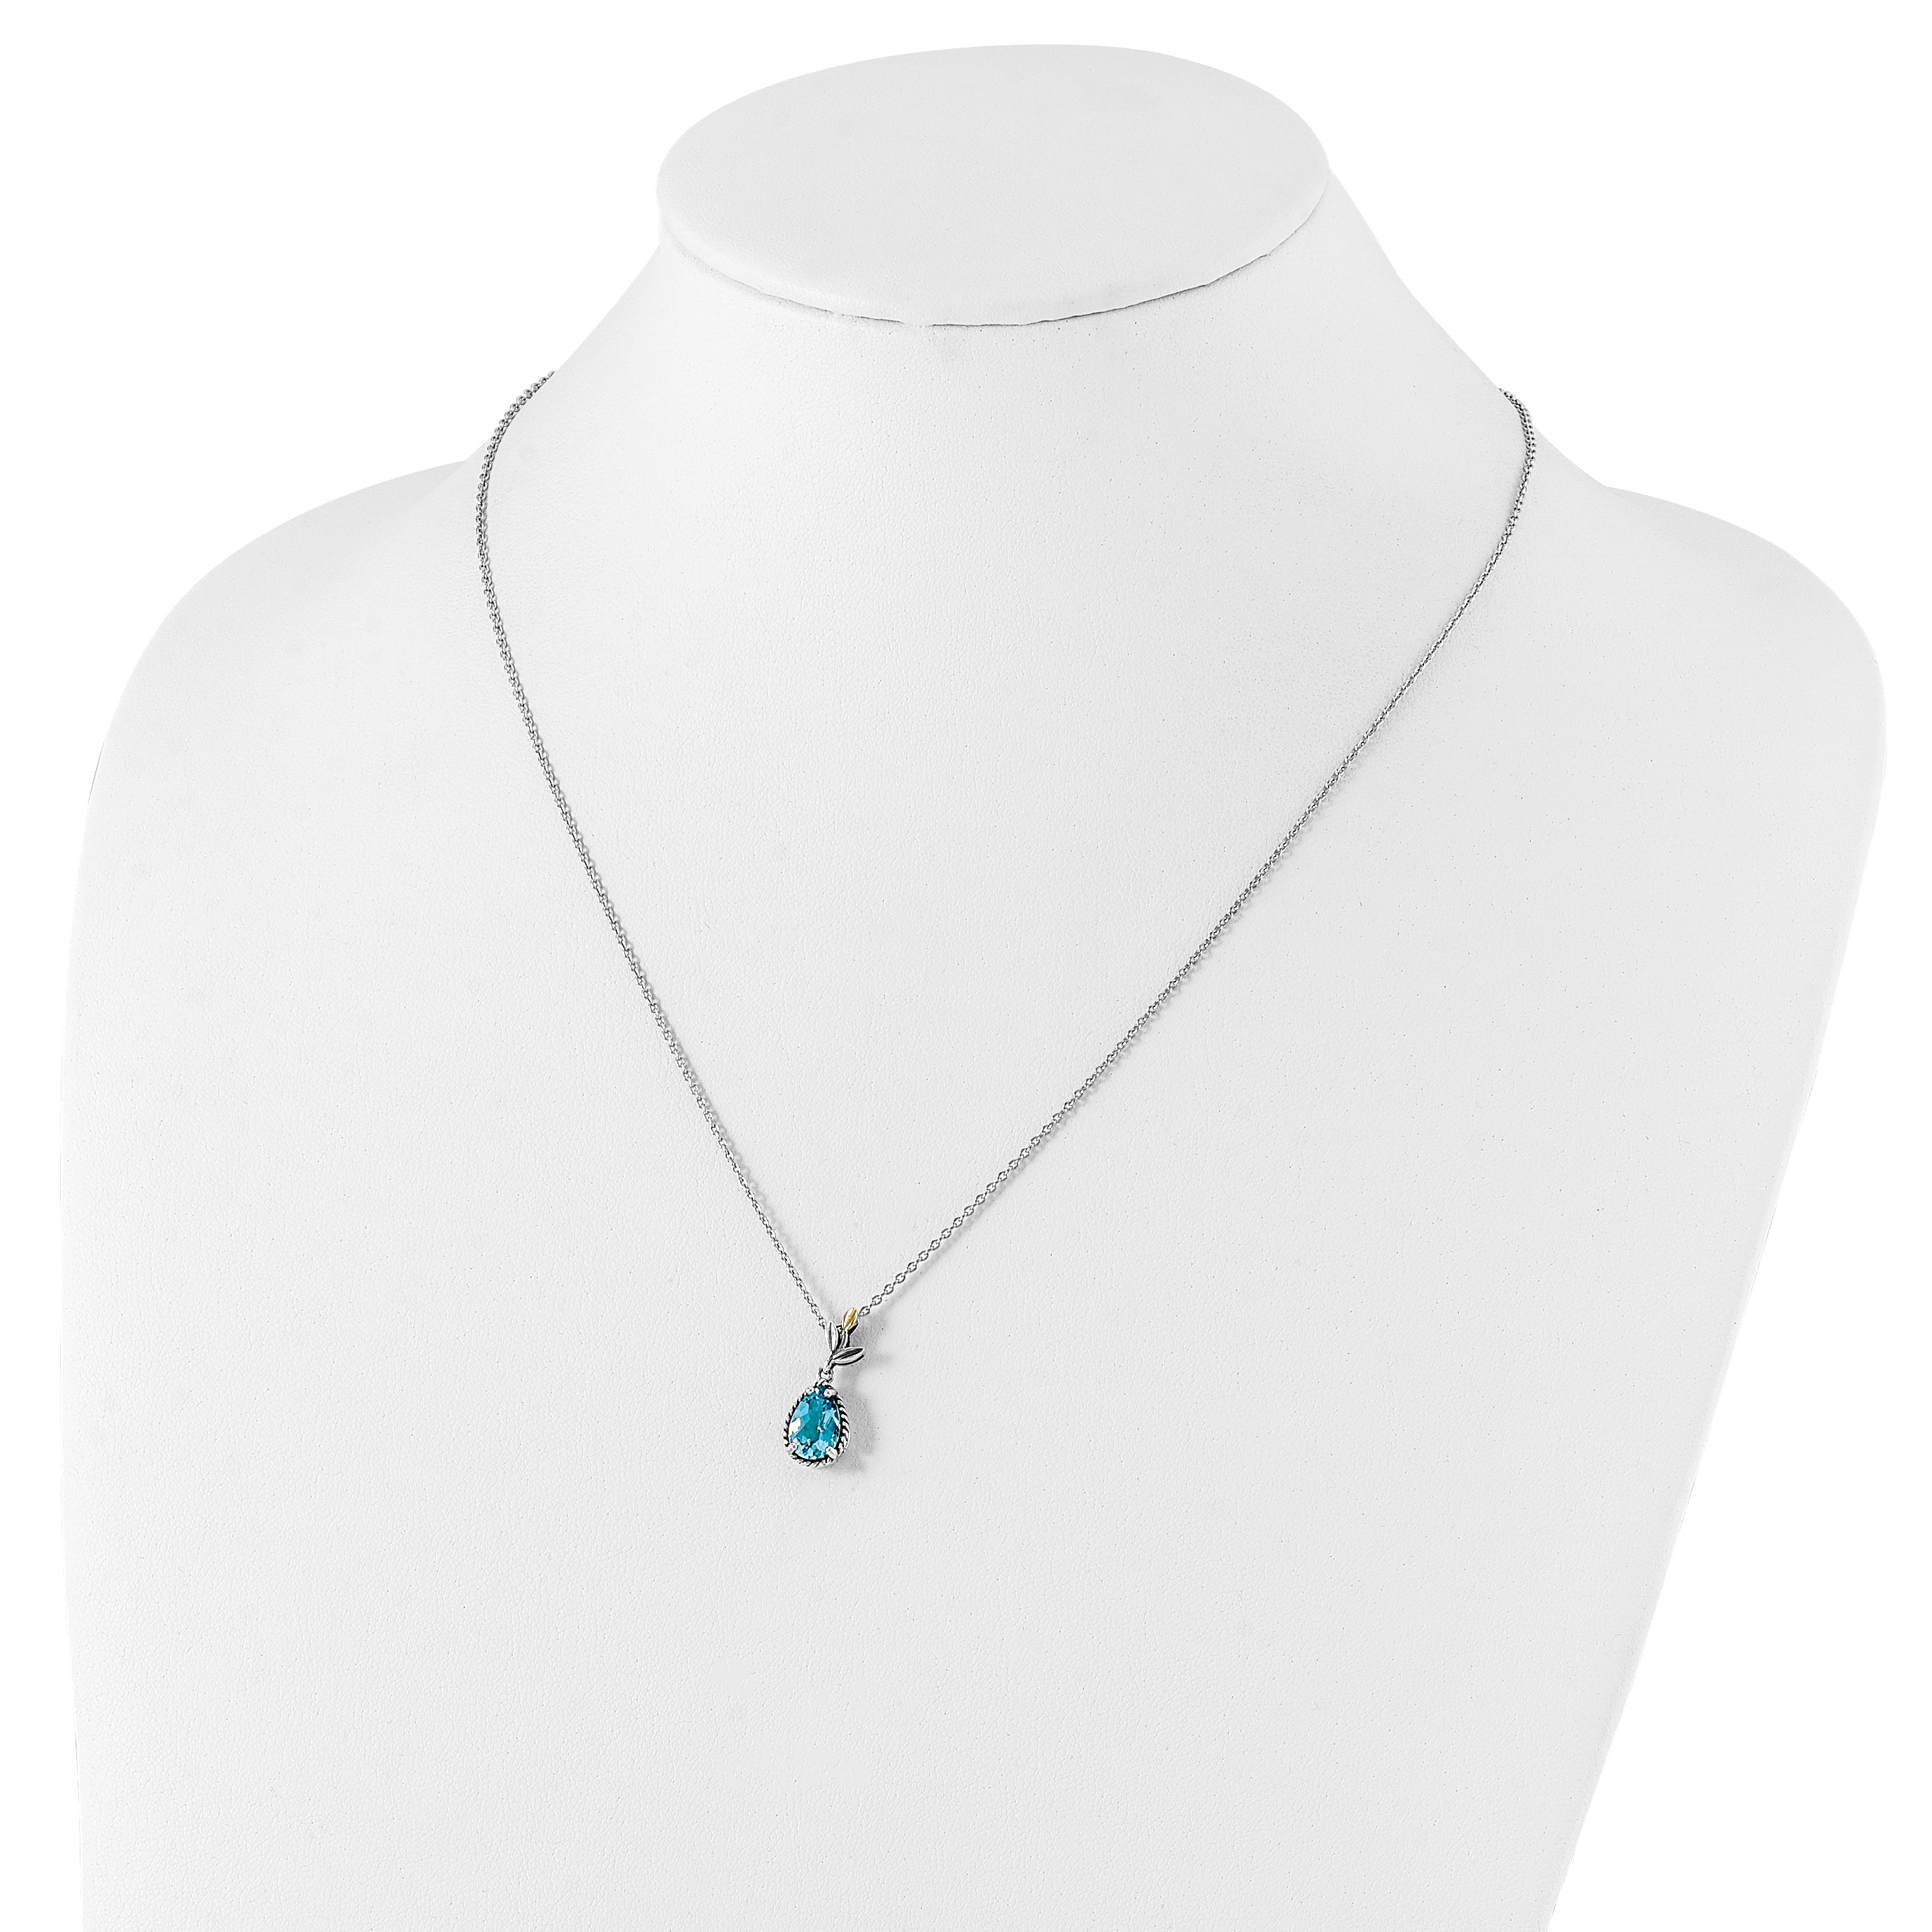 Shey Couture Sterling Silver with 14K Accent 18 Inch Leaves with Pear Shape Checkerboard Blue Topaz Necklace with 2 Inch Extender